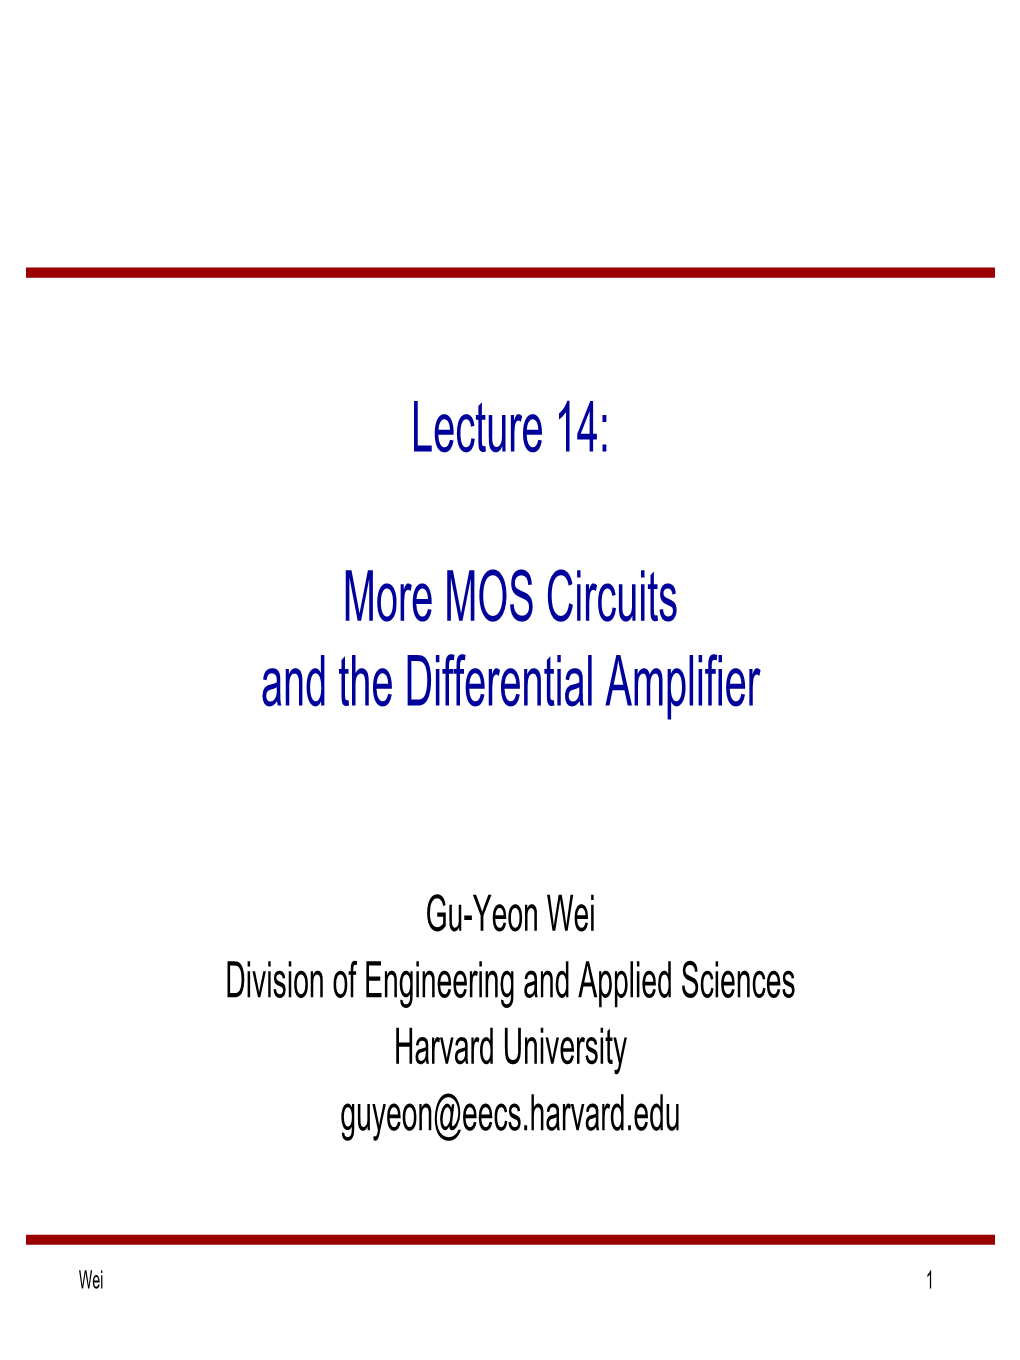 Lecture 14: More MOS Circuits and the Differential Amplifier